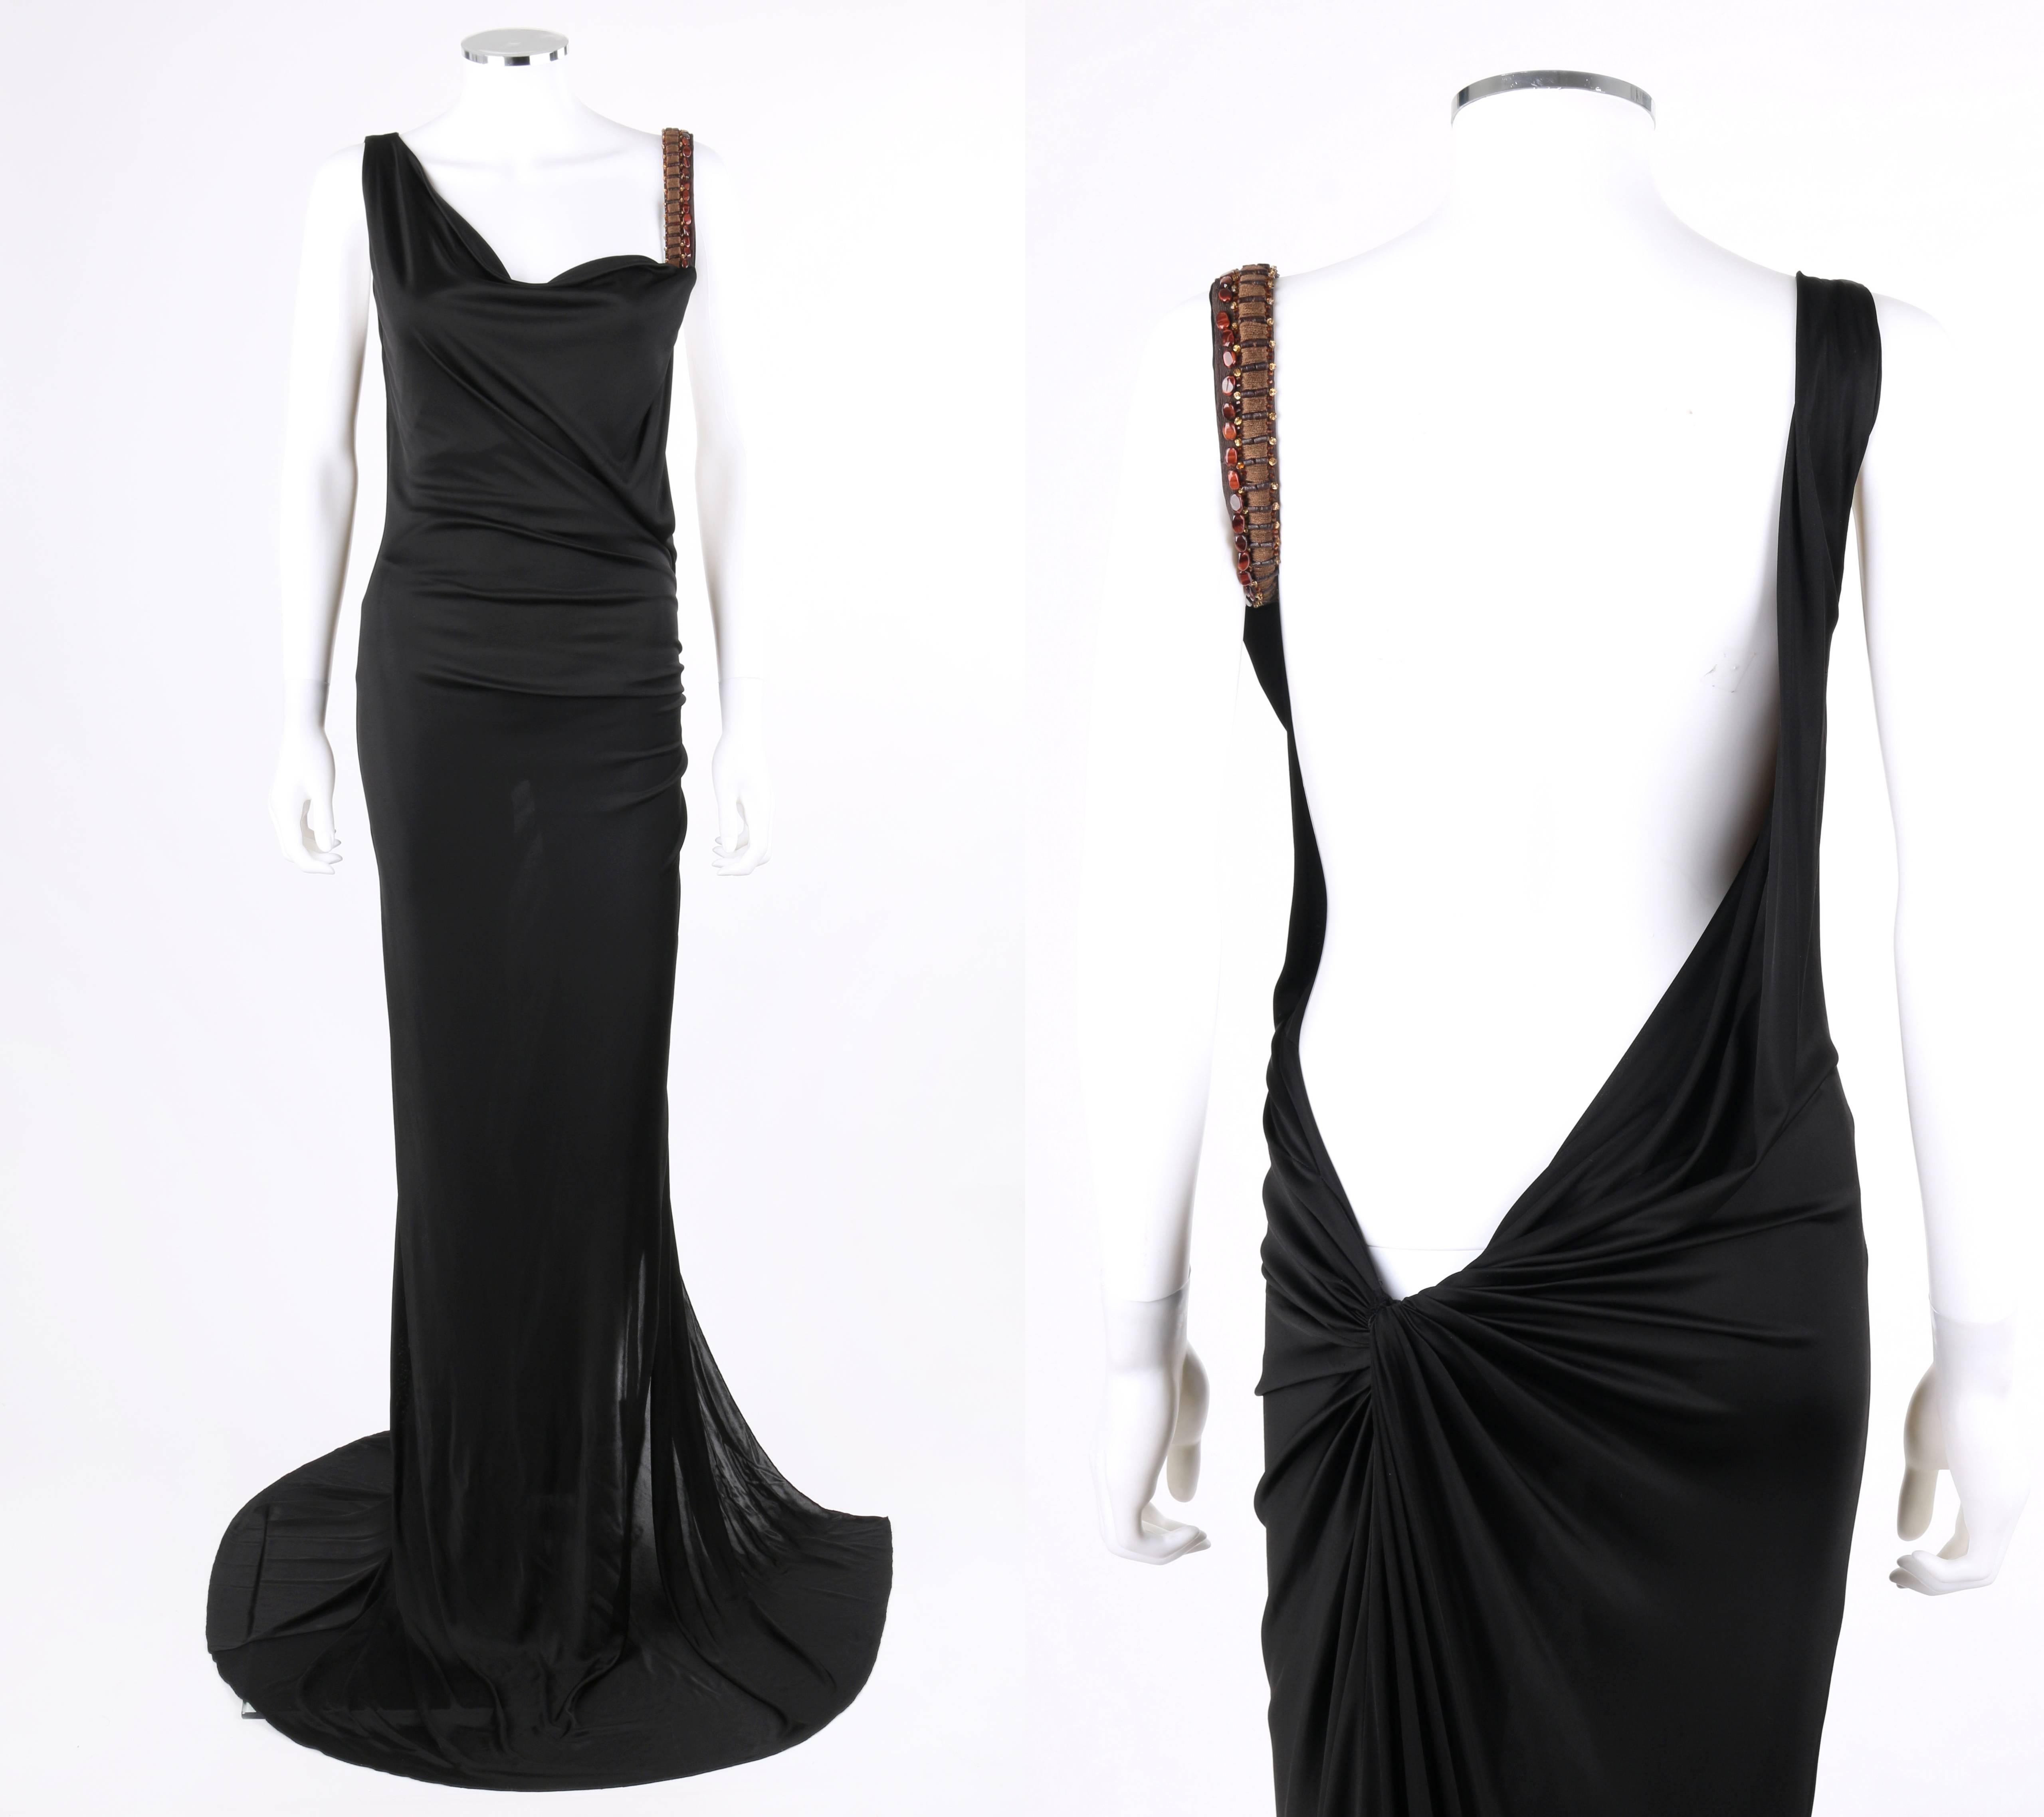 Roberto Cavalli Spring / Summer 2005 black jersey knit open back draped evening gown; New with tags. Runway look #59. Right embellished shoulder strap with brown satin stitch embroidery and glass beading of varying shapes in shades of brown and